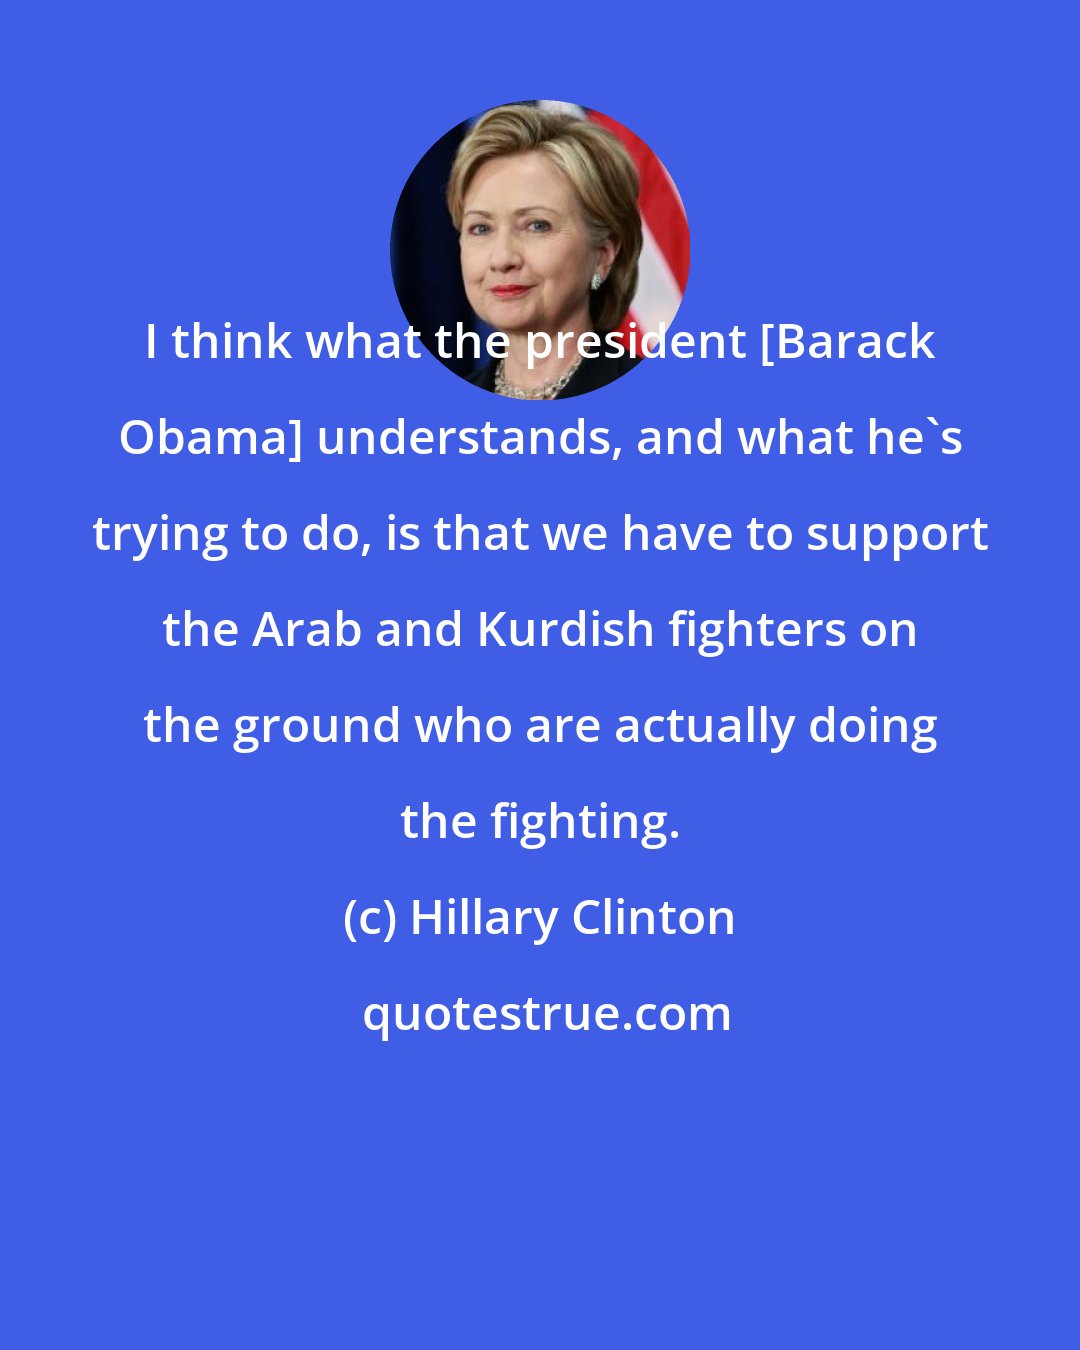 Hillary Clinton: I think what the president [Barack Obama] understands, and what he's trying to do, is that we have to support the Arab and Kurdish fighters on the ground who are actually doing the fighting.